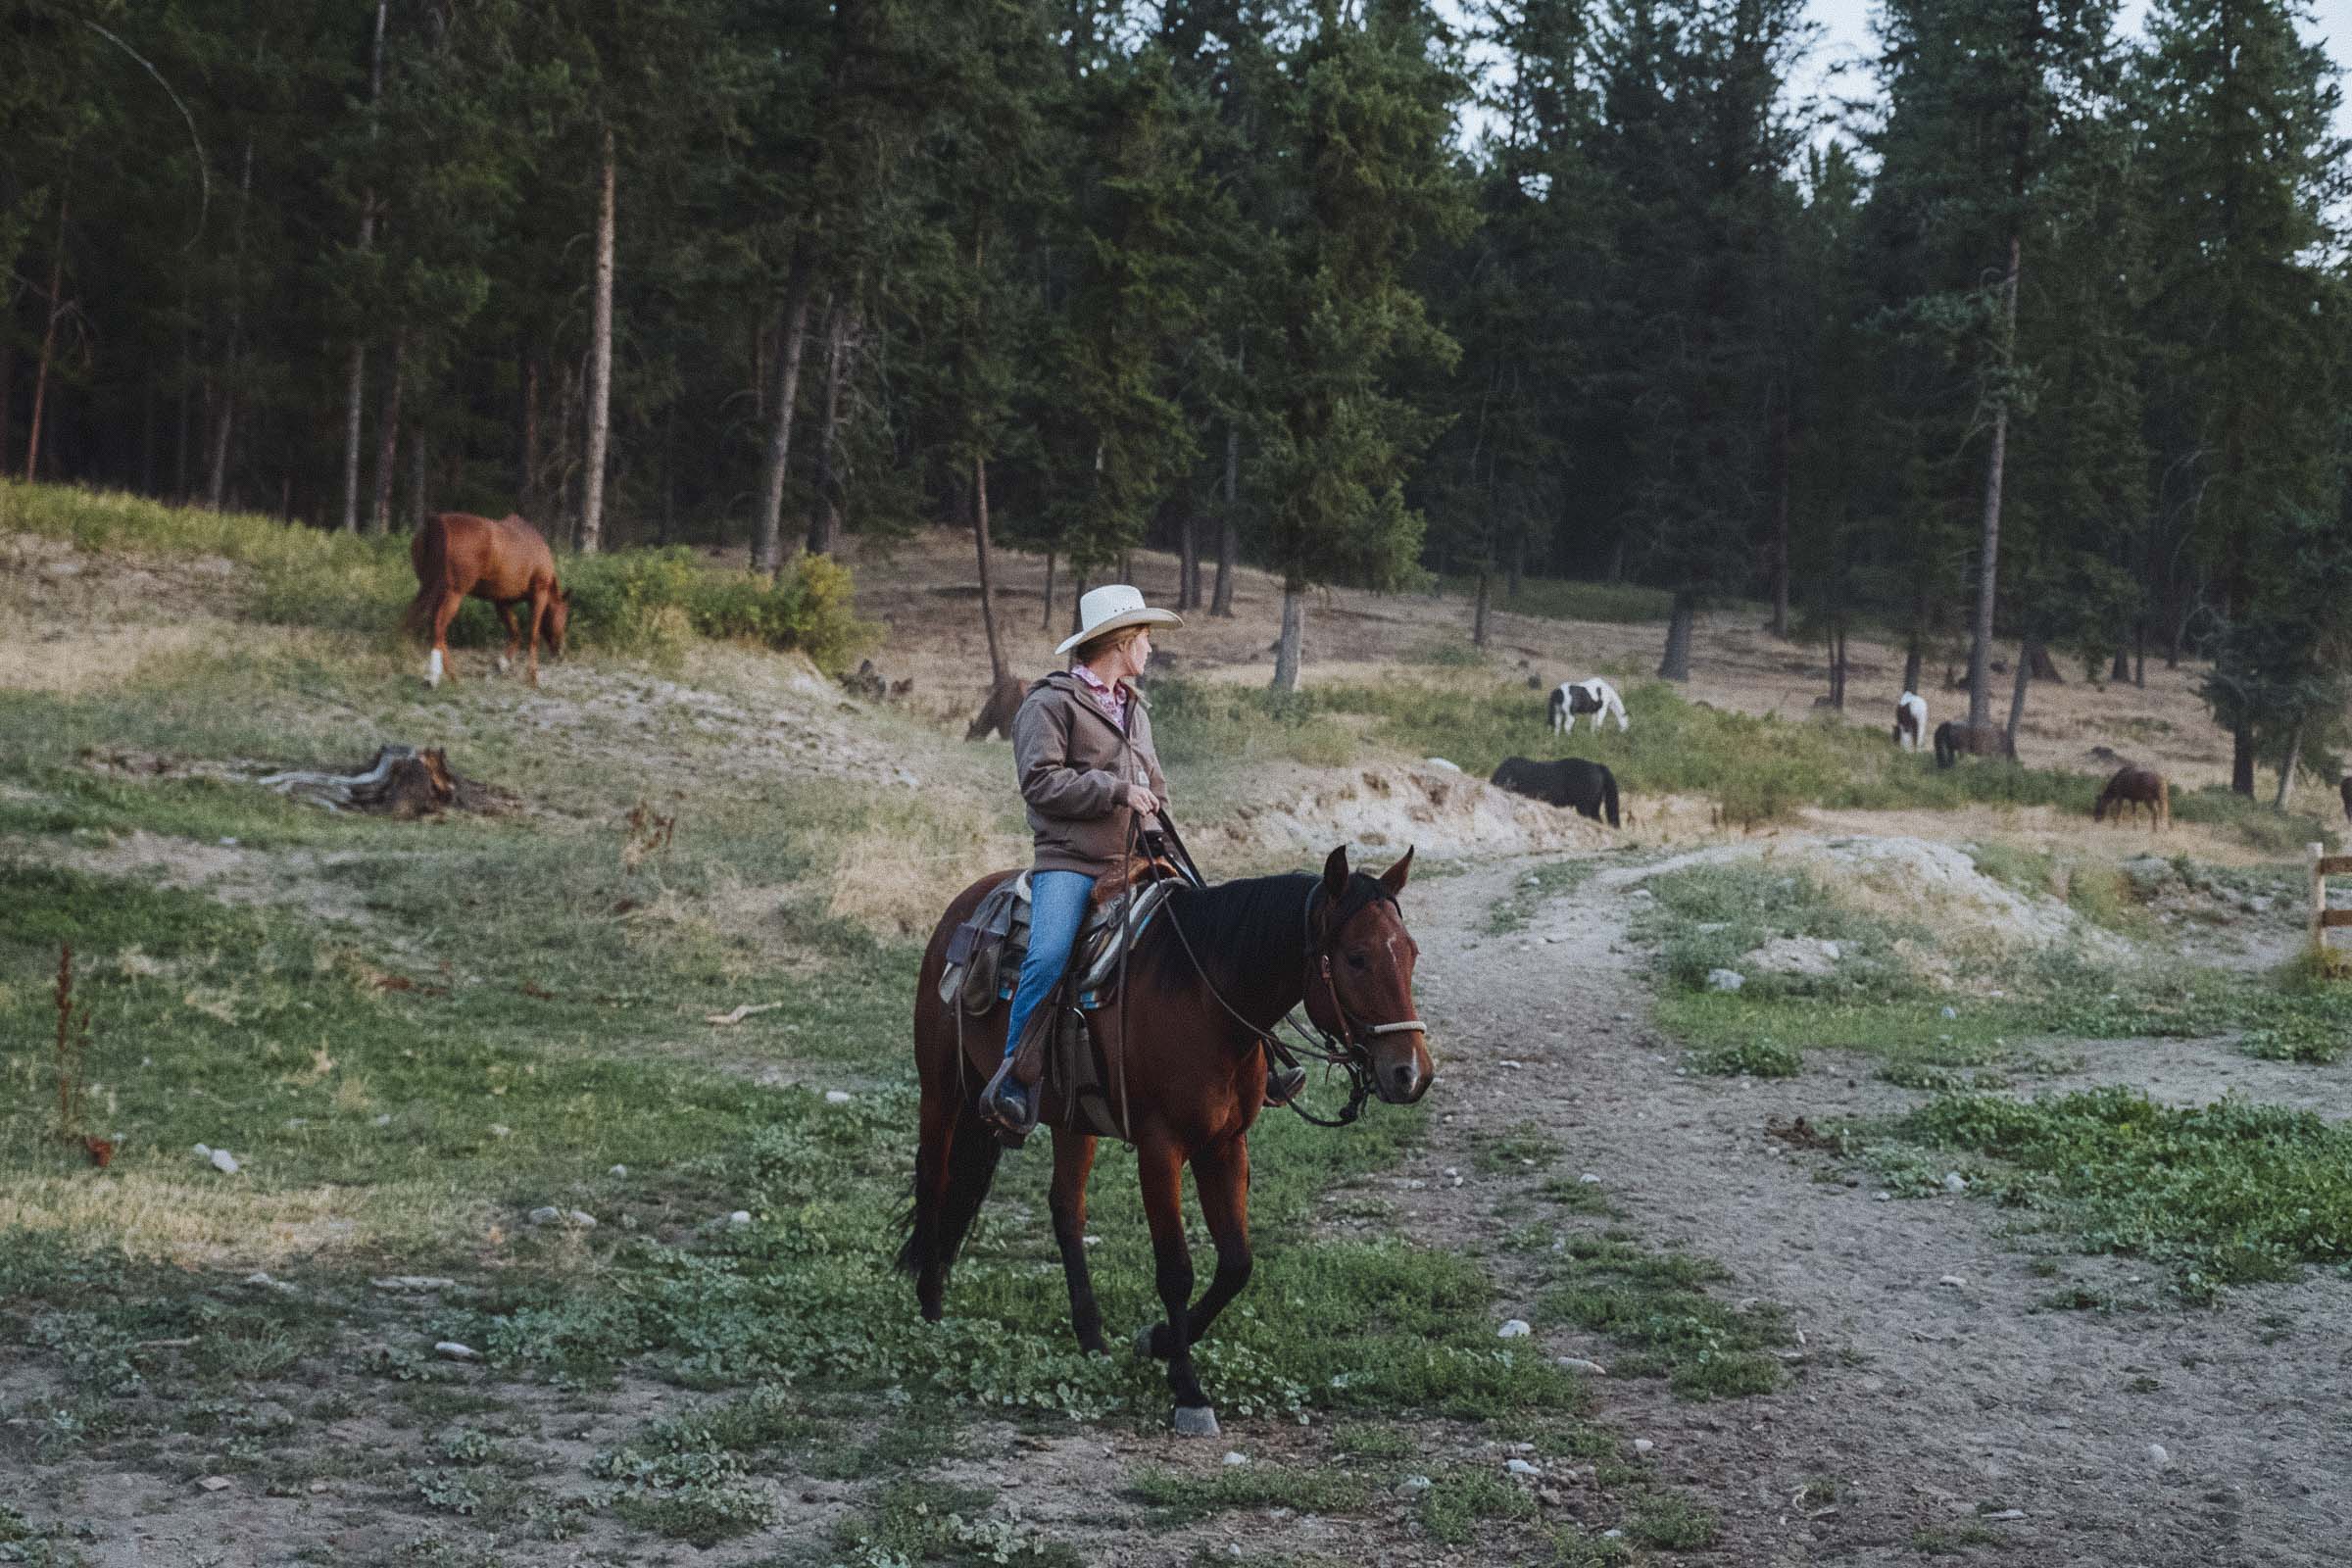 Riding horses in BC